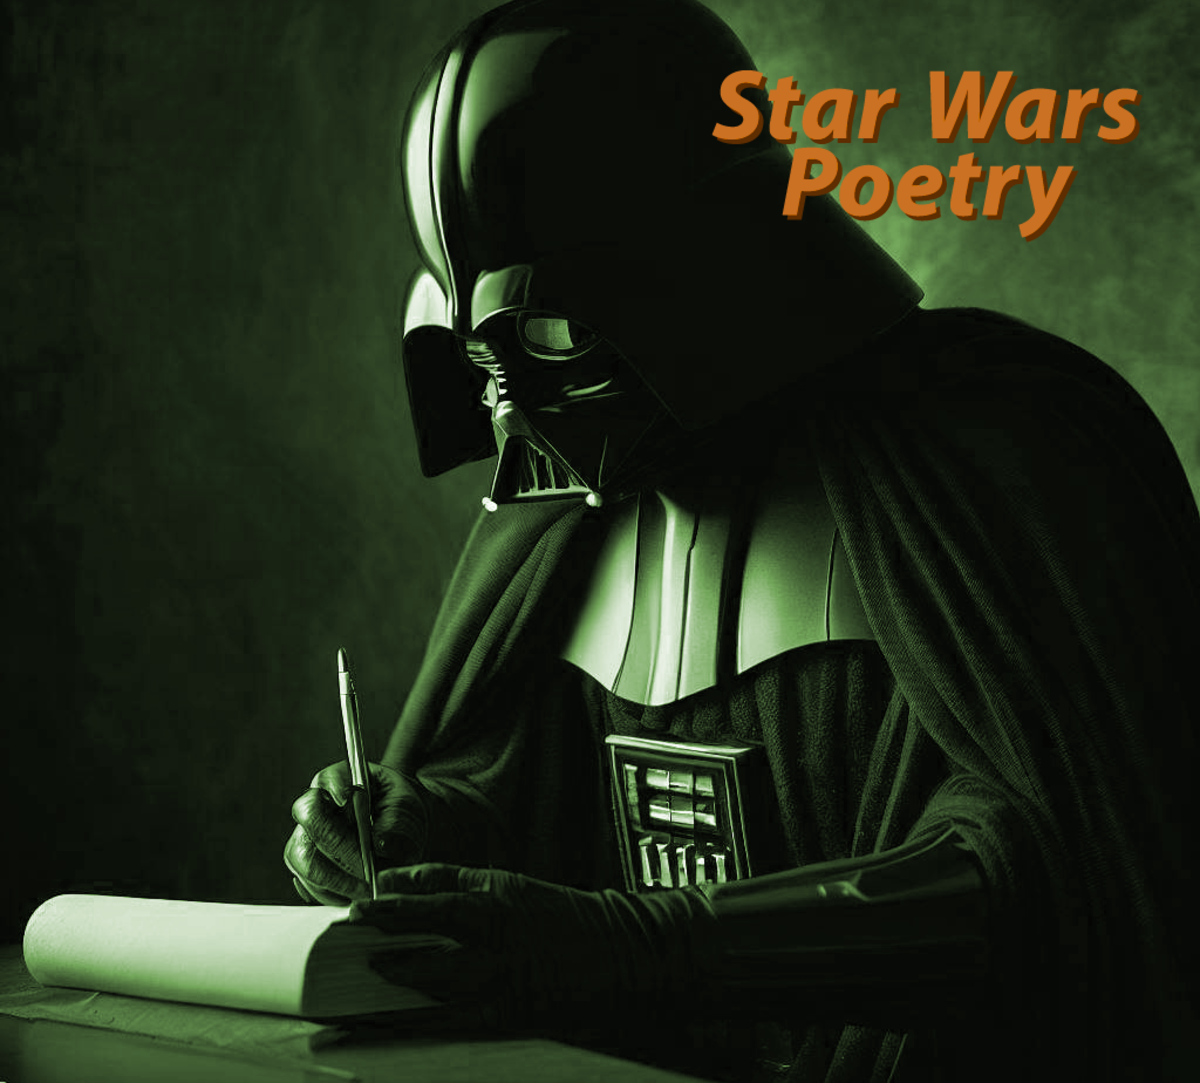 Star Wars Poetry: May The Force Be In These Words